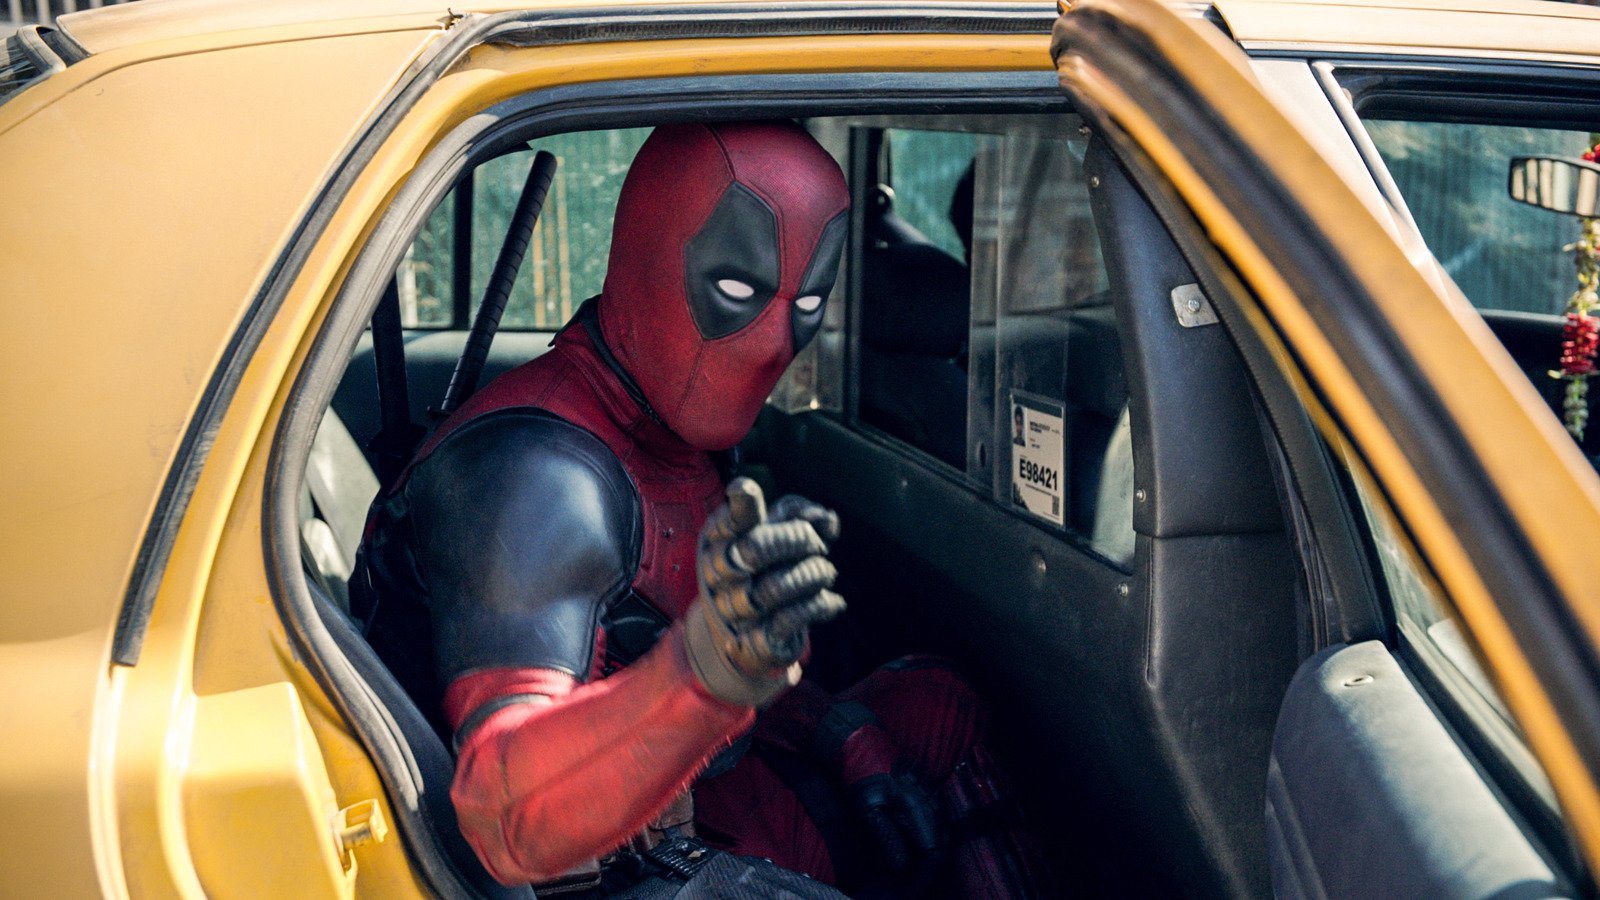 Ryan Reynolds' Best Movie On Rotten Tomatoes Is A Far Cry From Deadpool